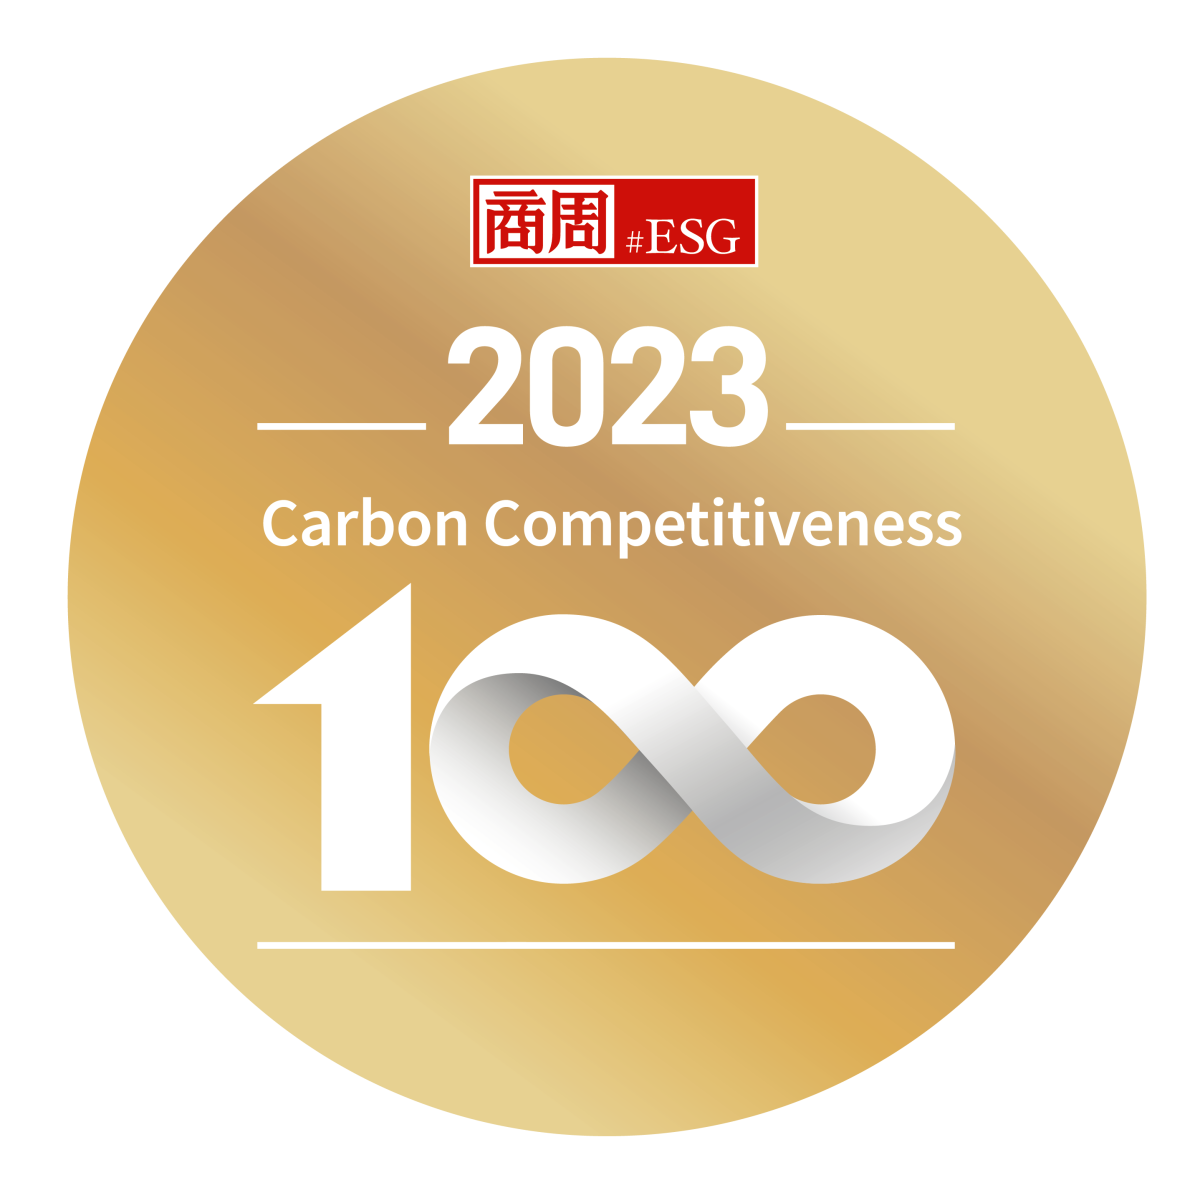 Radiant Opto-Electronics has been selected as the "Top 100 Carbon Competitiveness" company in "Business Weekly" for 2 consecutive years